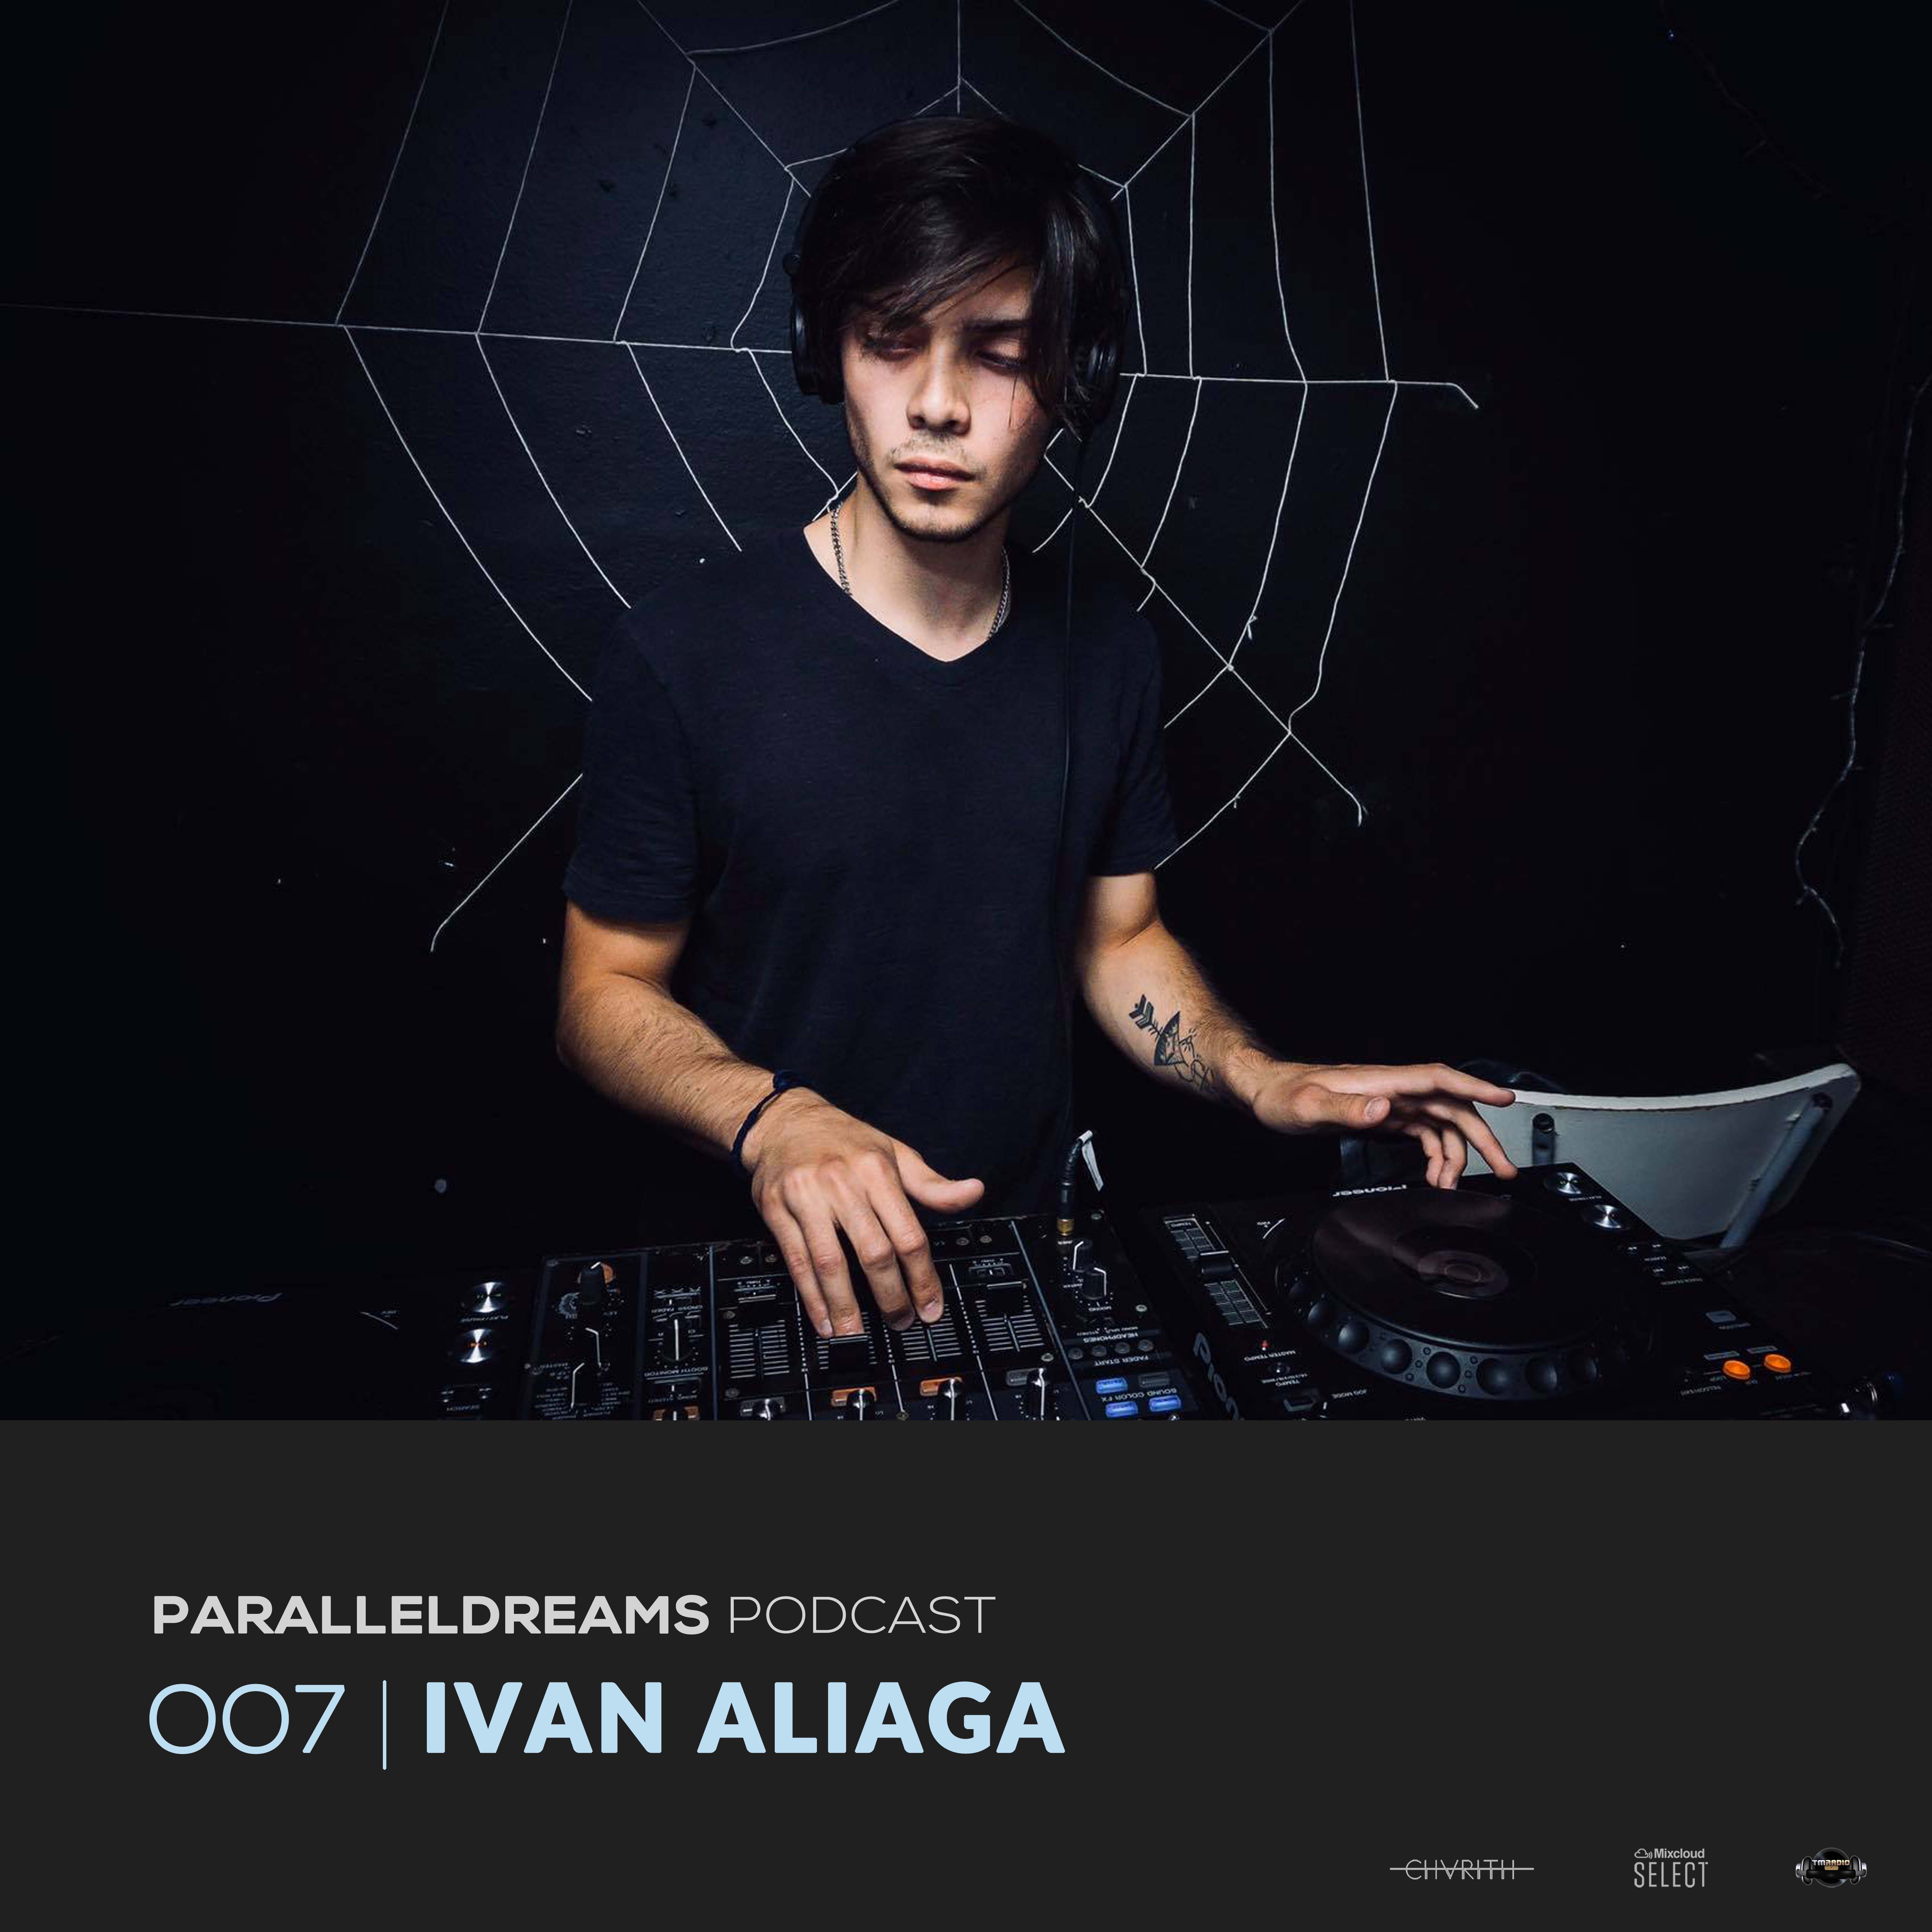 Parallel Dreams :: Episode 007 | IVAN ALIAGA (aired on July 3rd, 2020) banner logo